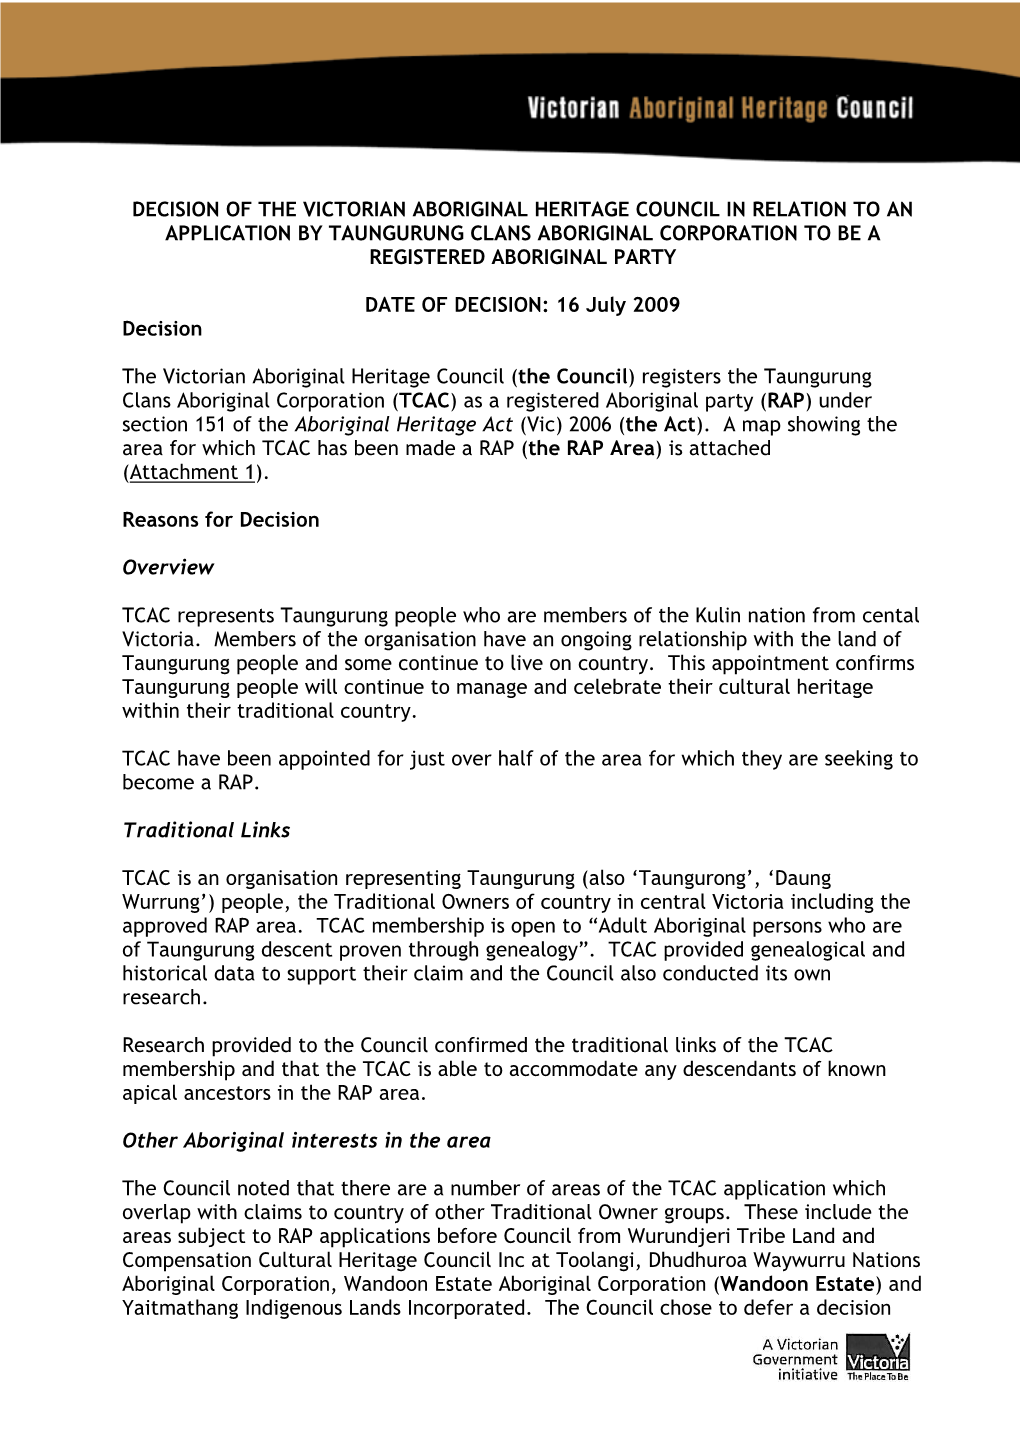 Victorian Aboriginal Heritage Council in Relation to an Application by Taungurung Clans Aboriginal Corporation to Be a Registered Aboriginal Party